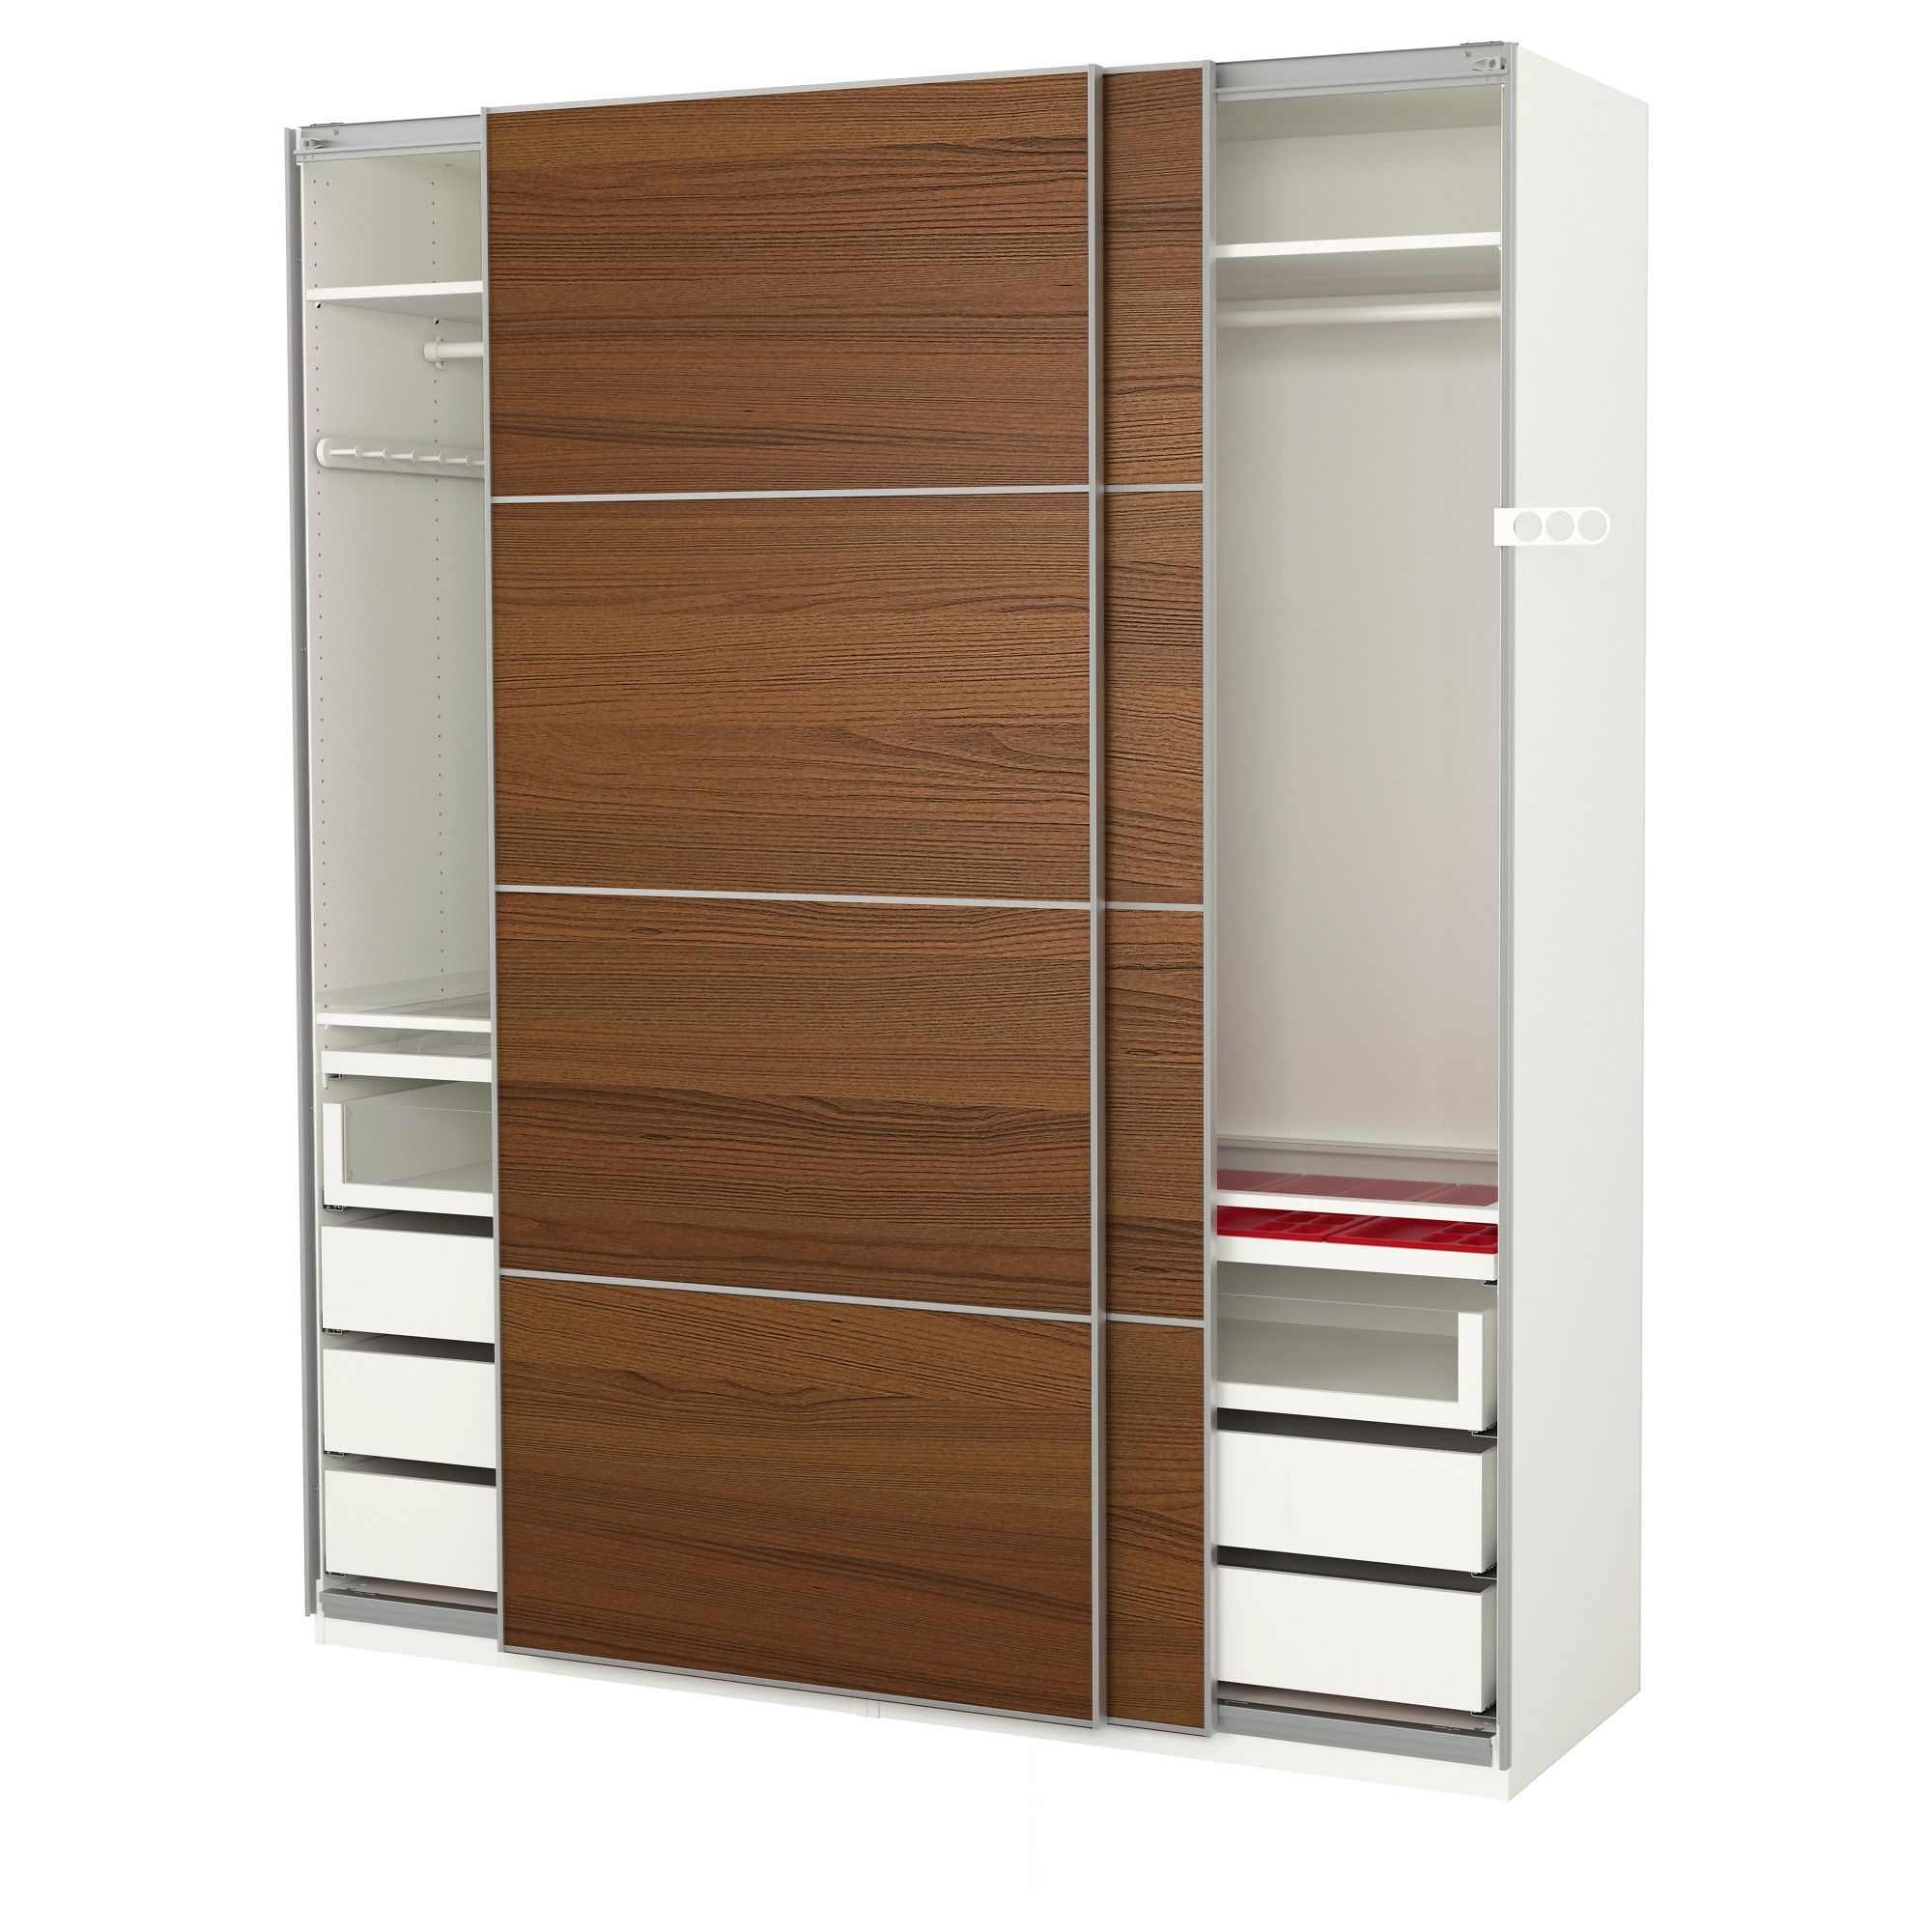 Wardrobes Pax System Ikea Intended For Wardrobe With Shelves And Drawers (View 12 of 15)